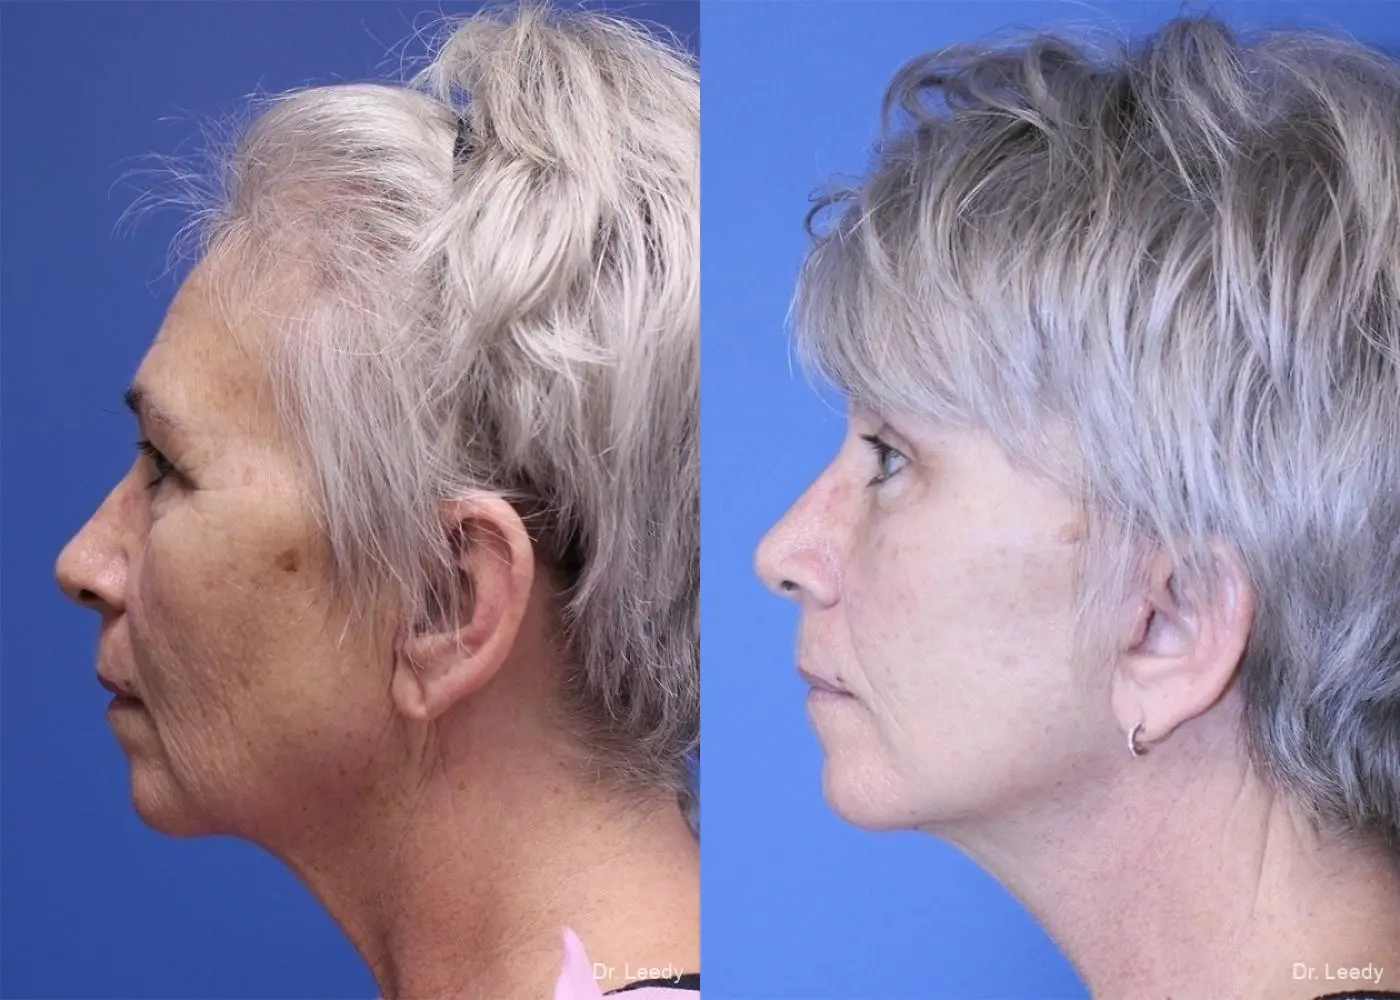 Facelift: Patient 4 - Before and After 5